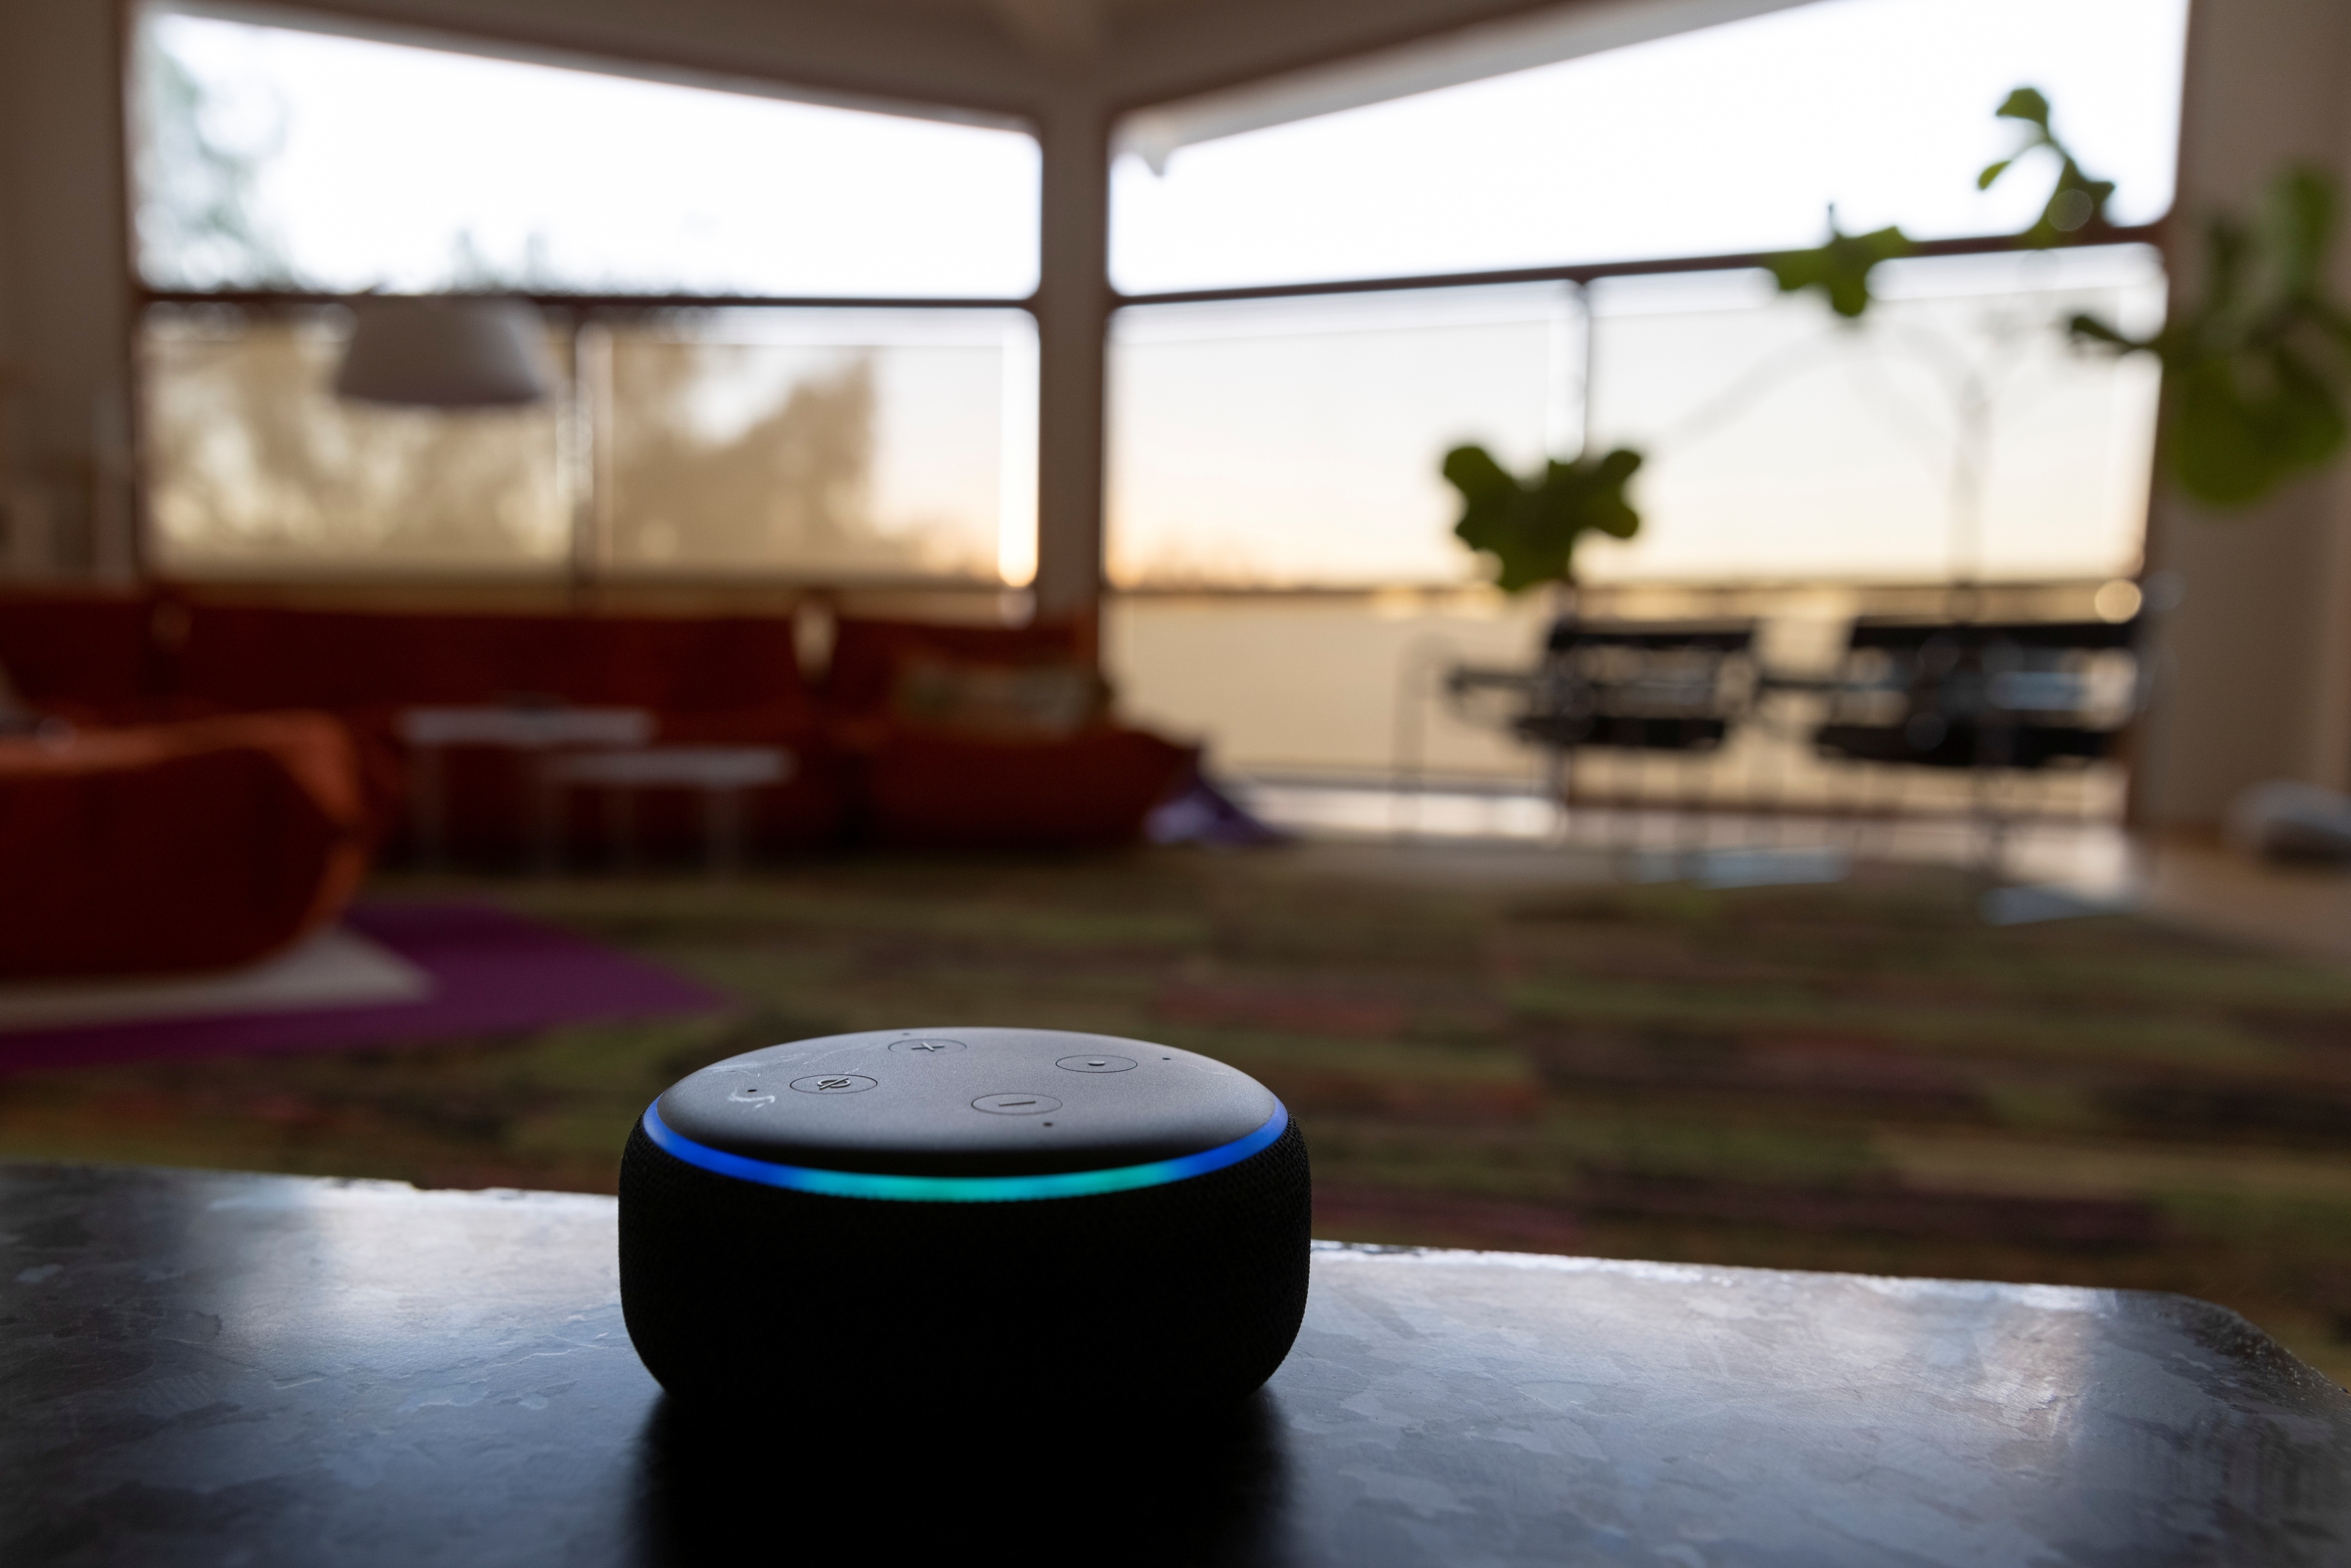 An Amazon DOT Alexa device is shown in this image illustration